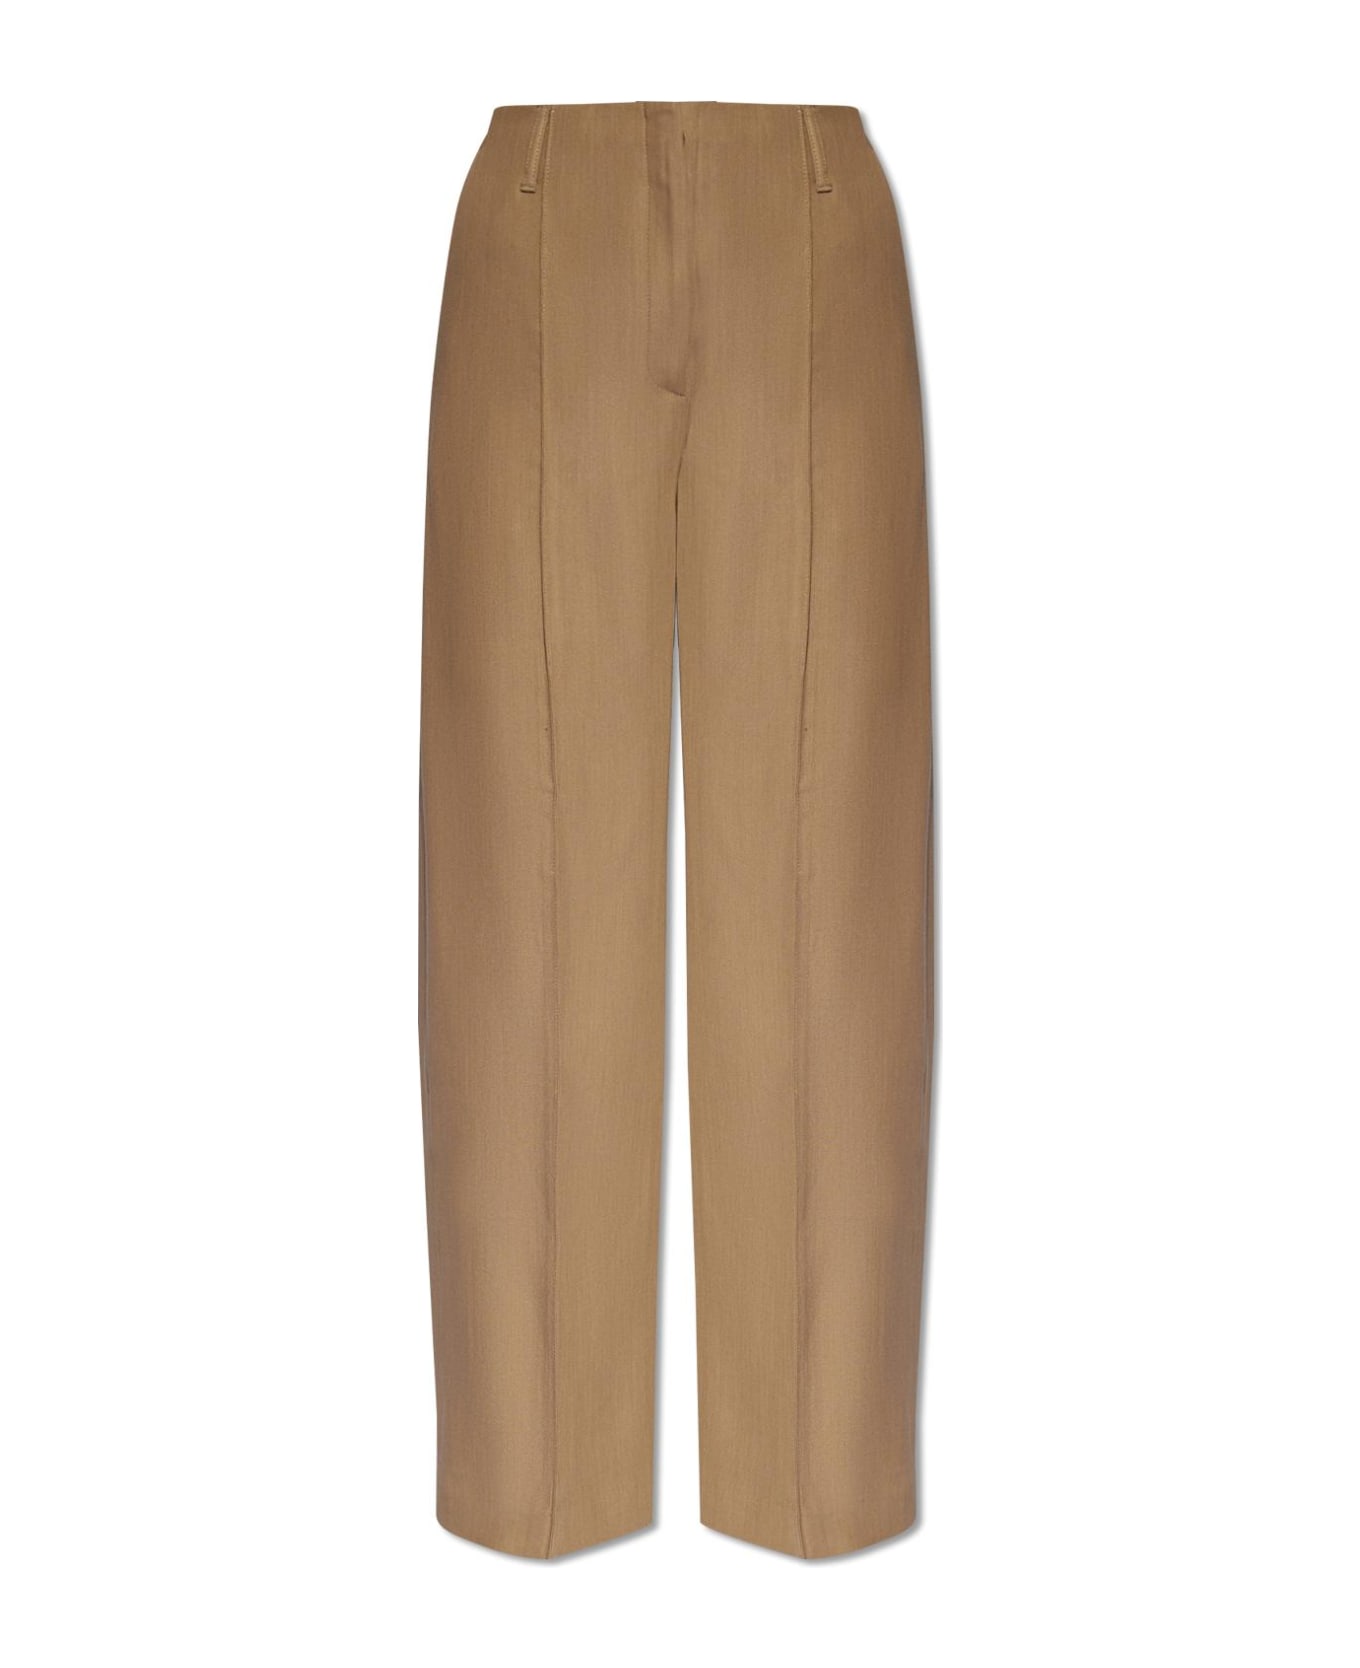 Acne Studios Pleat-front Trousers - Beige ボトムス